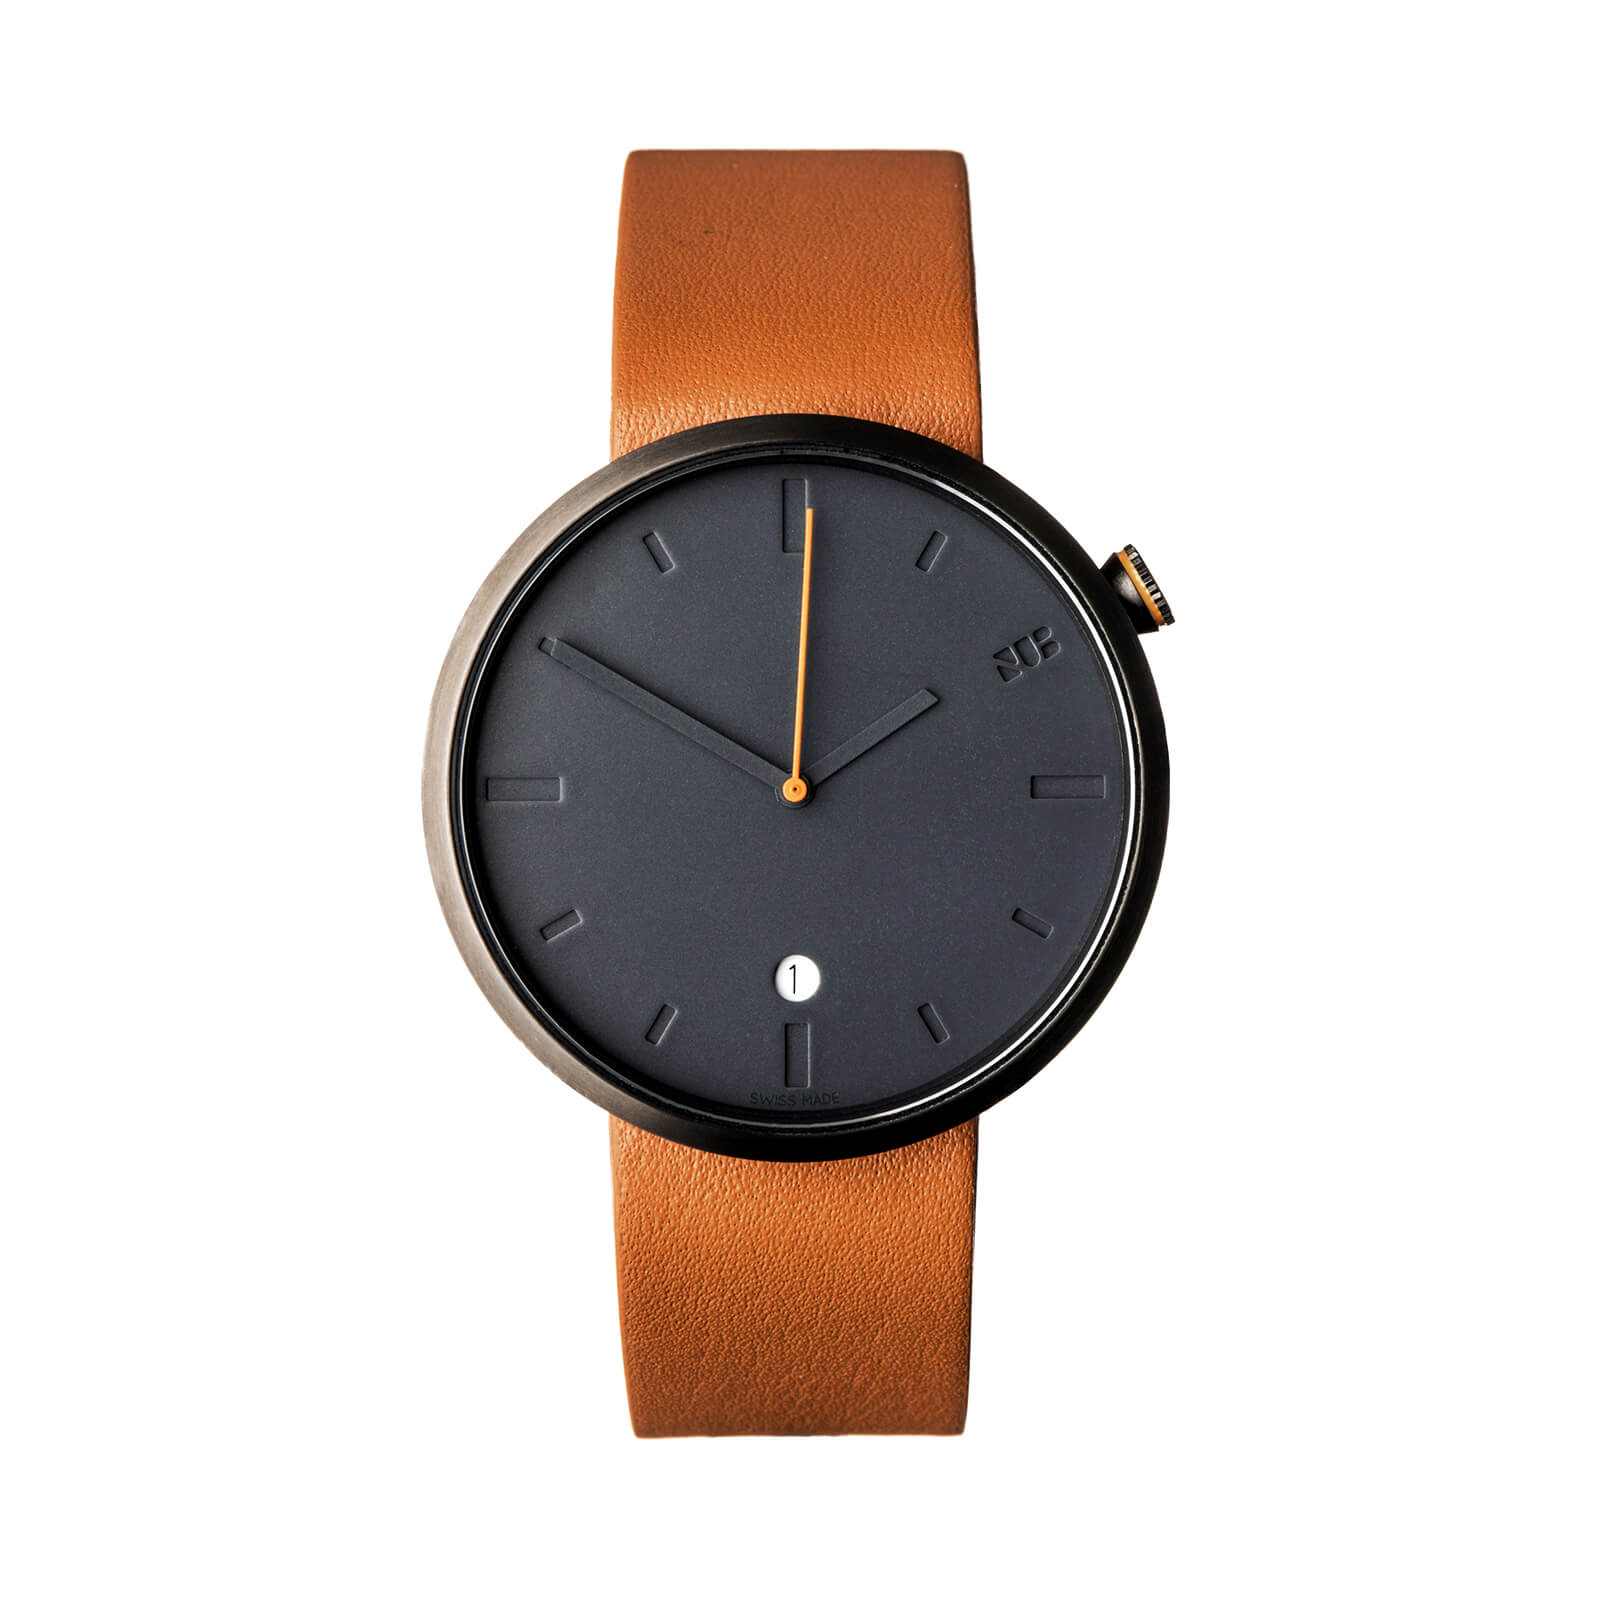 The 5 Best Minimalist Watches For Men [Buying Guide] - NUB Watches